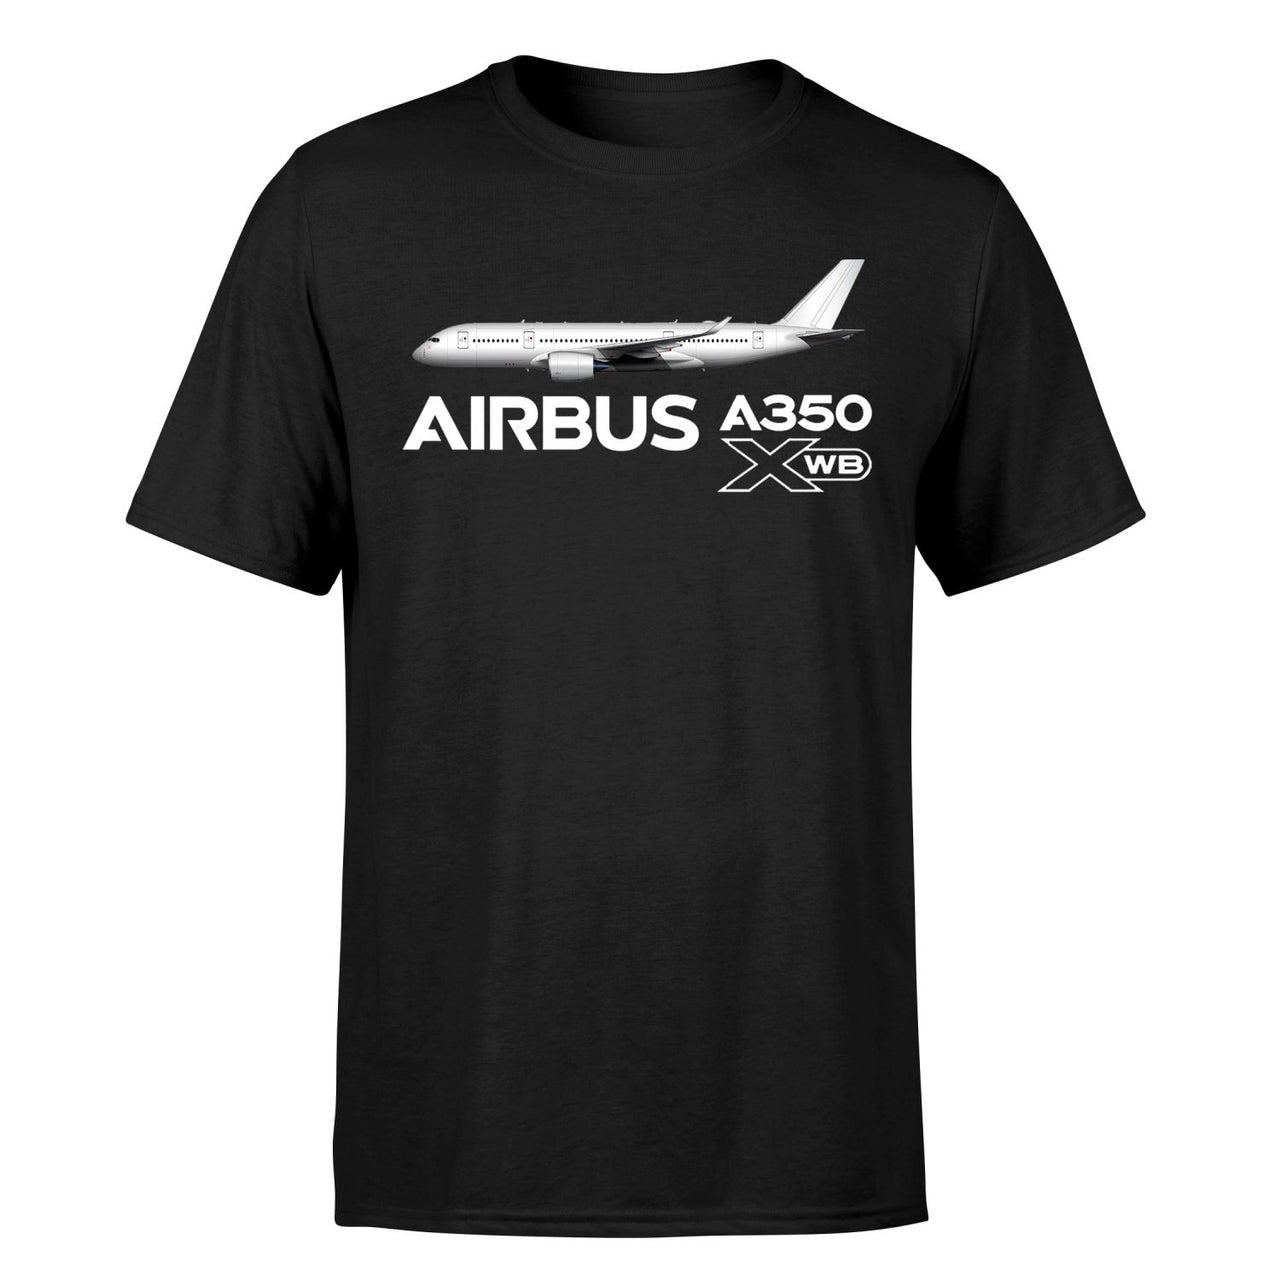 The Airbus A350 WXB Designed T-Shirts